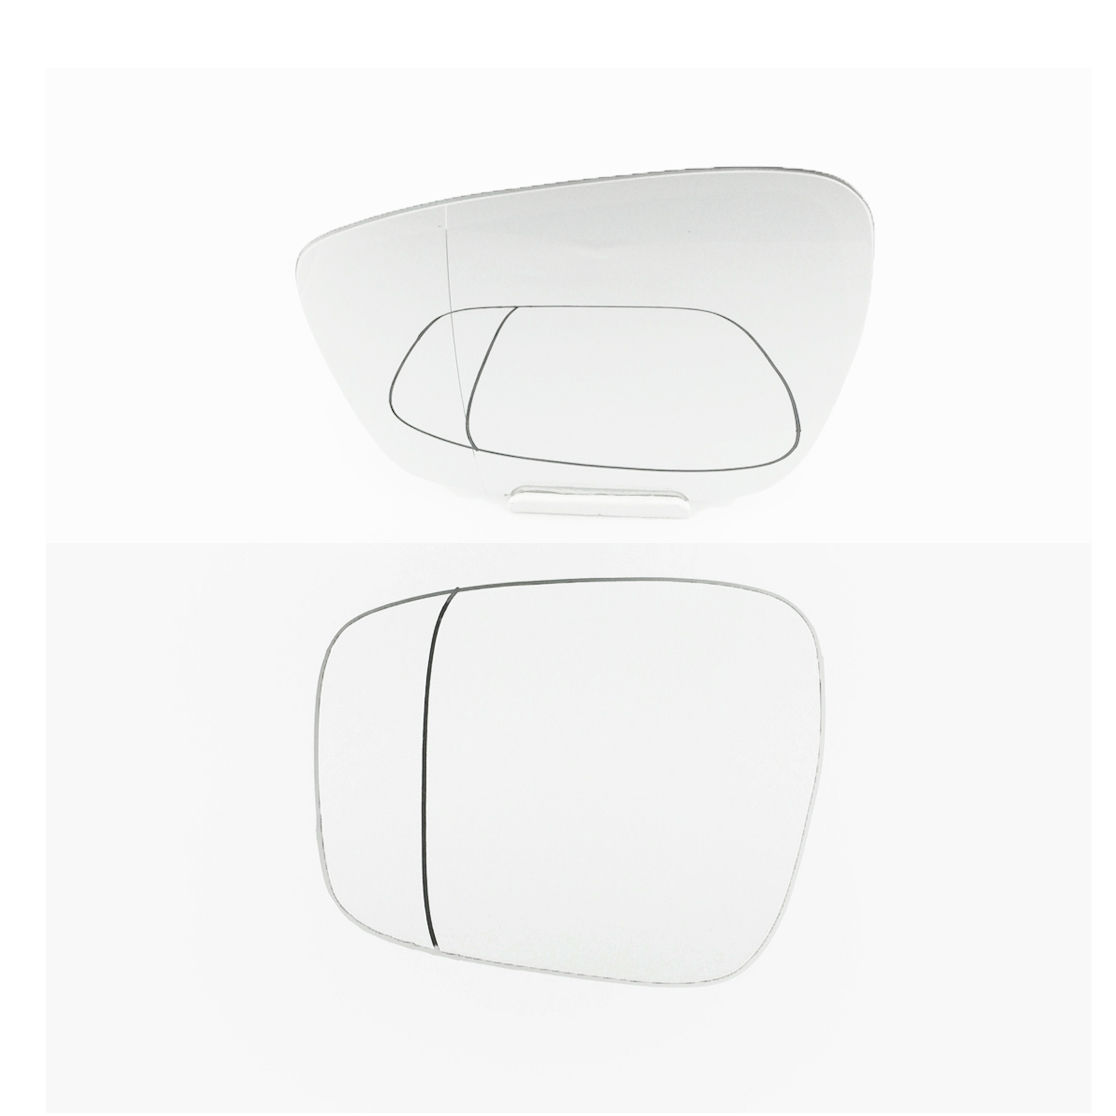 Peugeot 2008 Wing Mirror Glass RIGHT HAND ( UK Driver Side ) 2013 to 2018 – Convex Wing Mirror